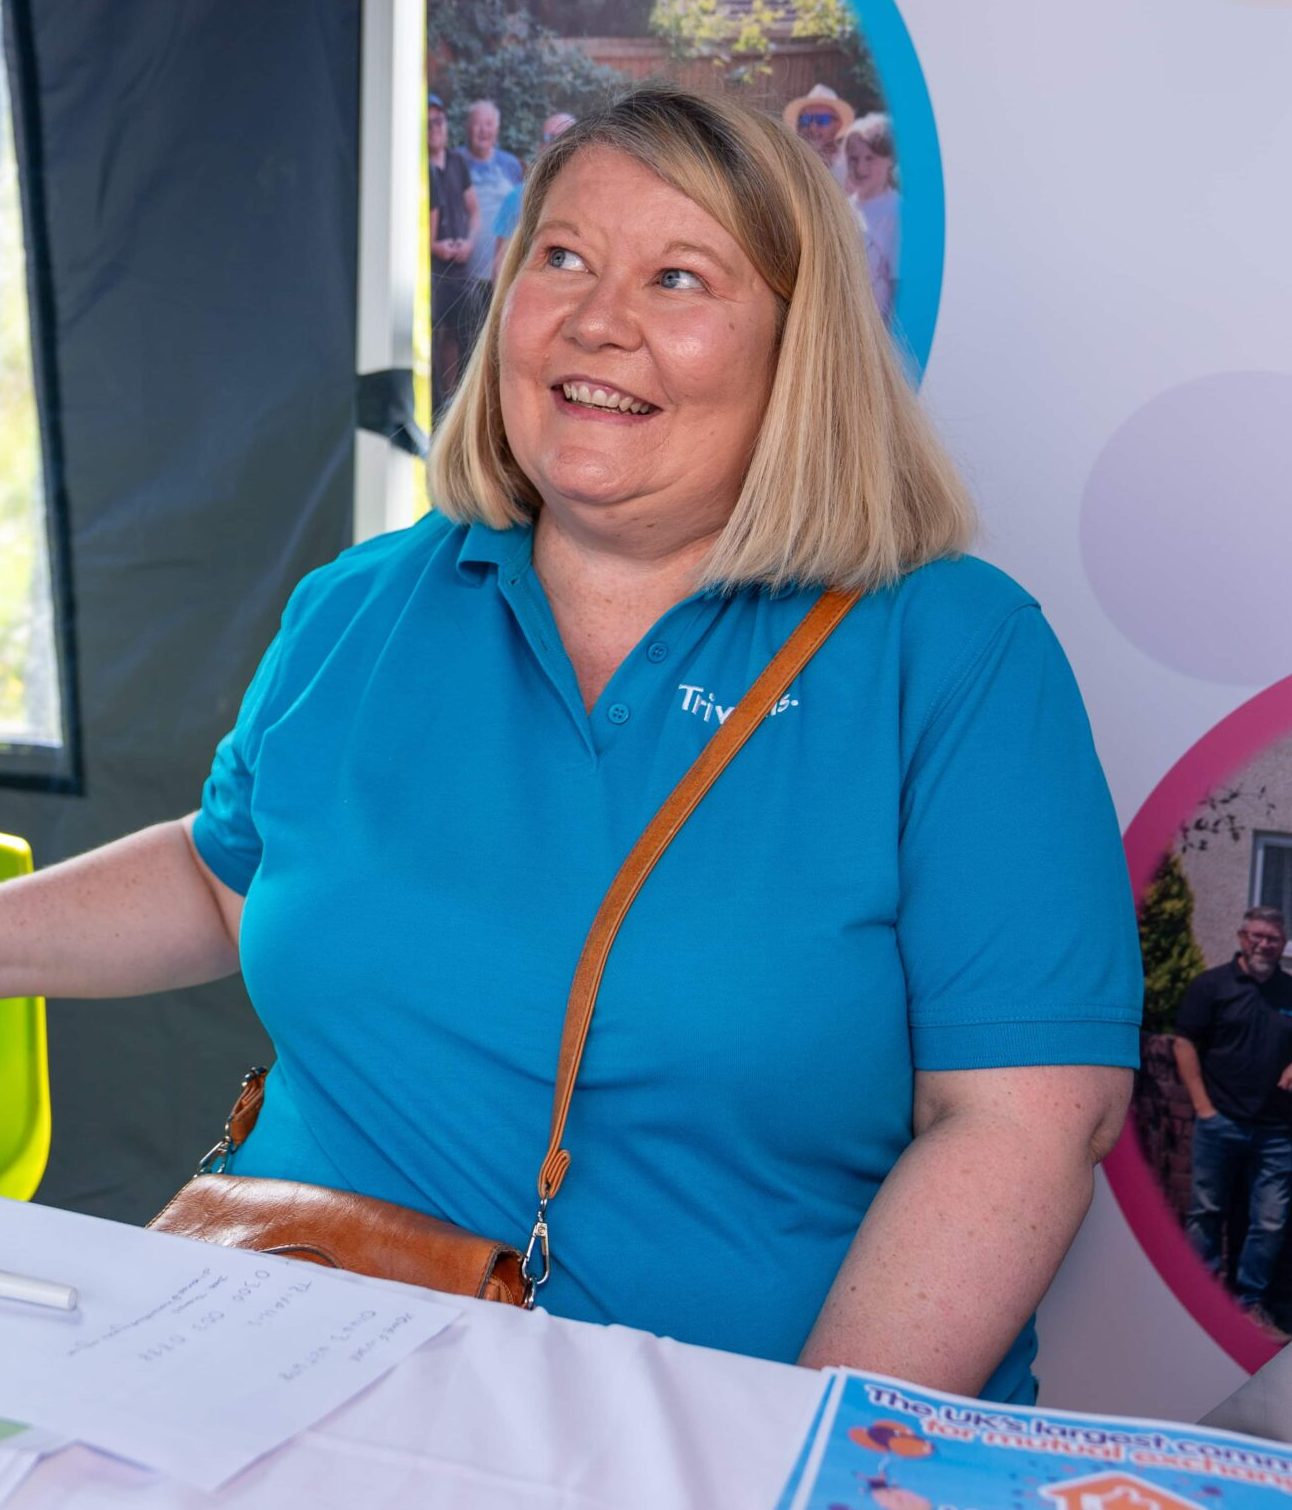 Trivallis Housing Landlord Wales A smiling woman in a blue polo shirt engaging in a cheerful conversation at the Trivallis Community Housing event booth.